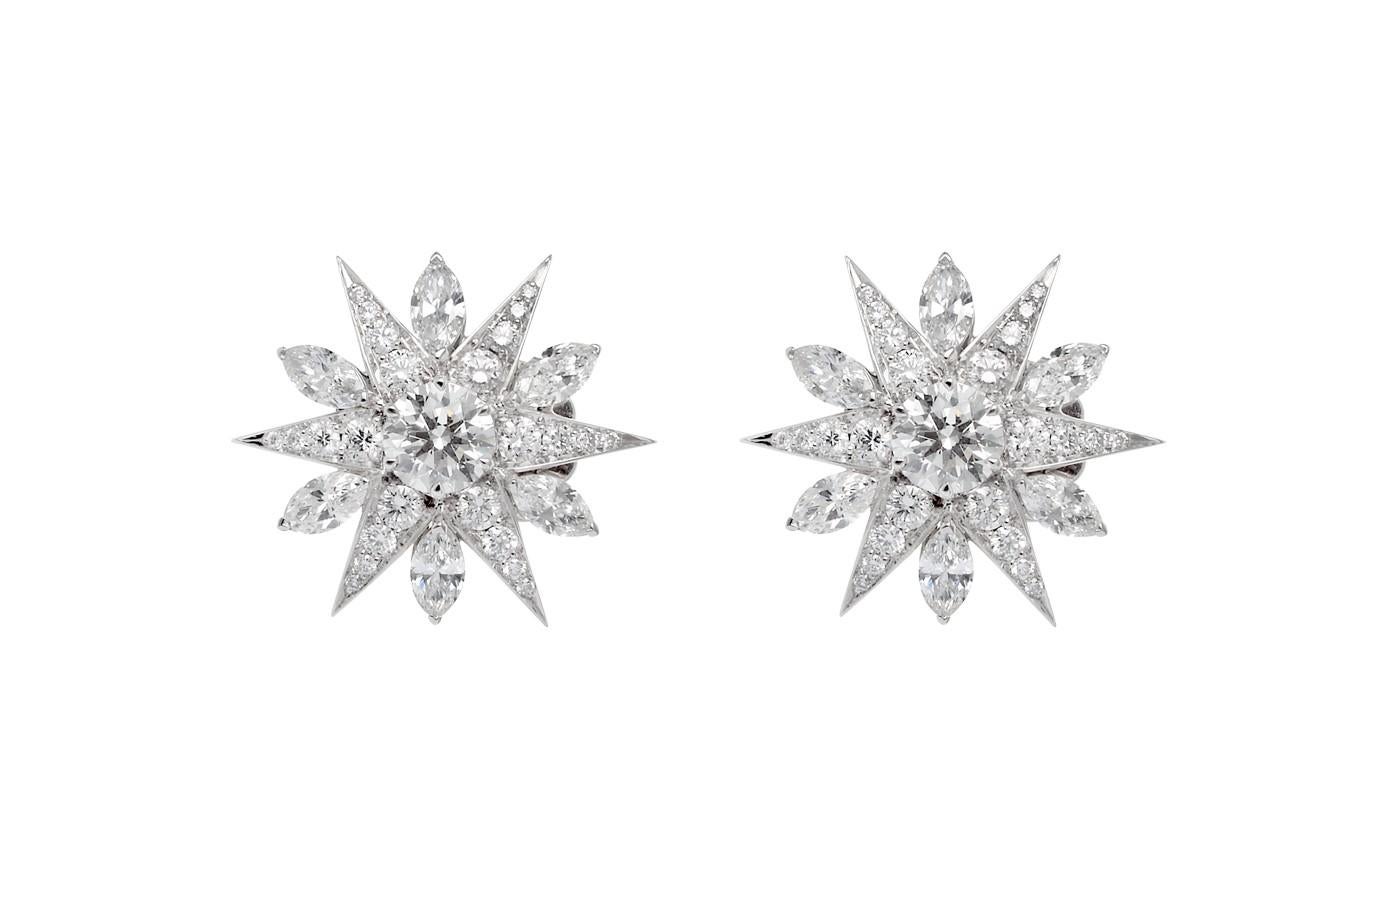 Designed for classic Hollywood glamour, the radiant white diamonds simply speak for themselves. Set in 18K white gold, nearly 2 carats of multishaped diamonds surround the 0.5 carat centre stones make up a spectacular cluster of brilliance.